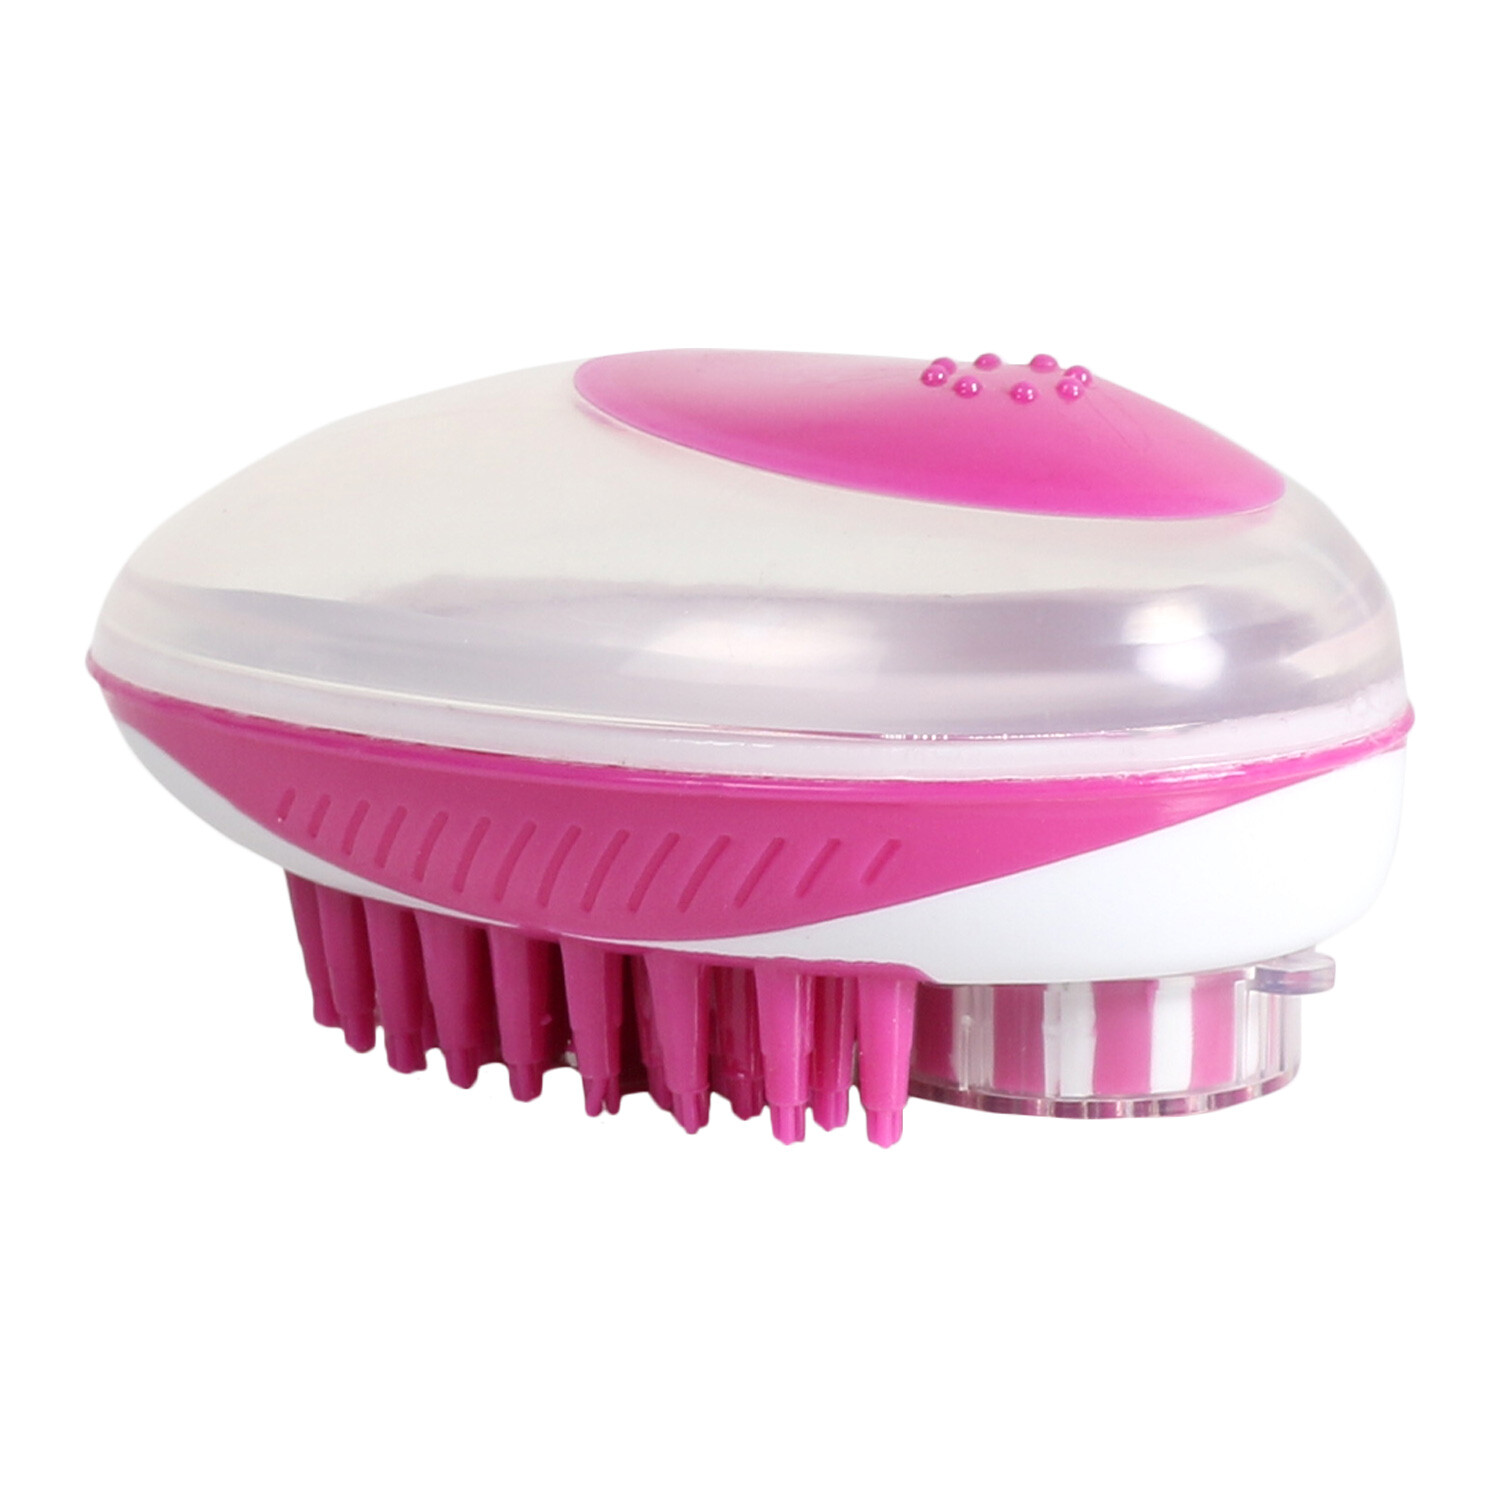 Single Clever Paws 2 in 1 Shampoo Grooming Brush in Assorted styles Image 2